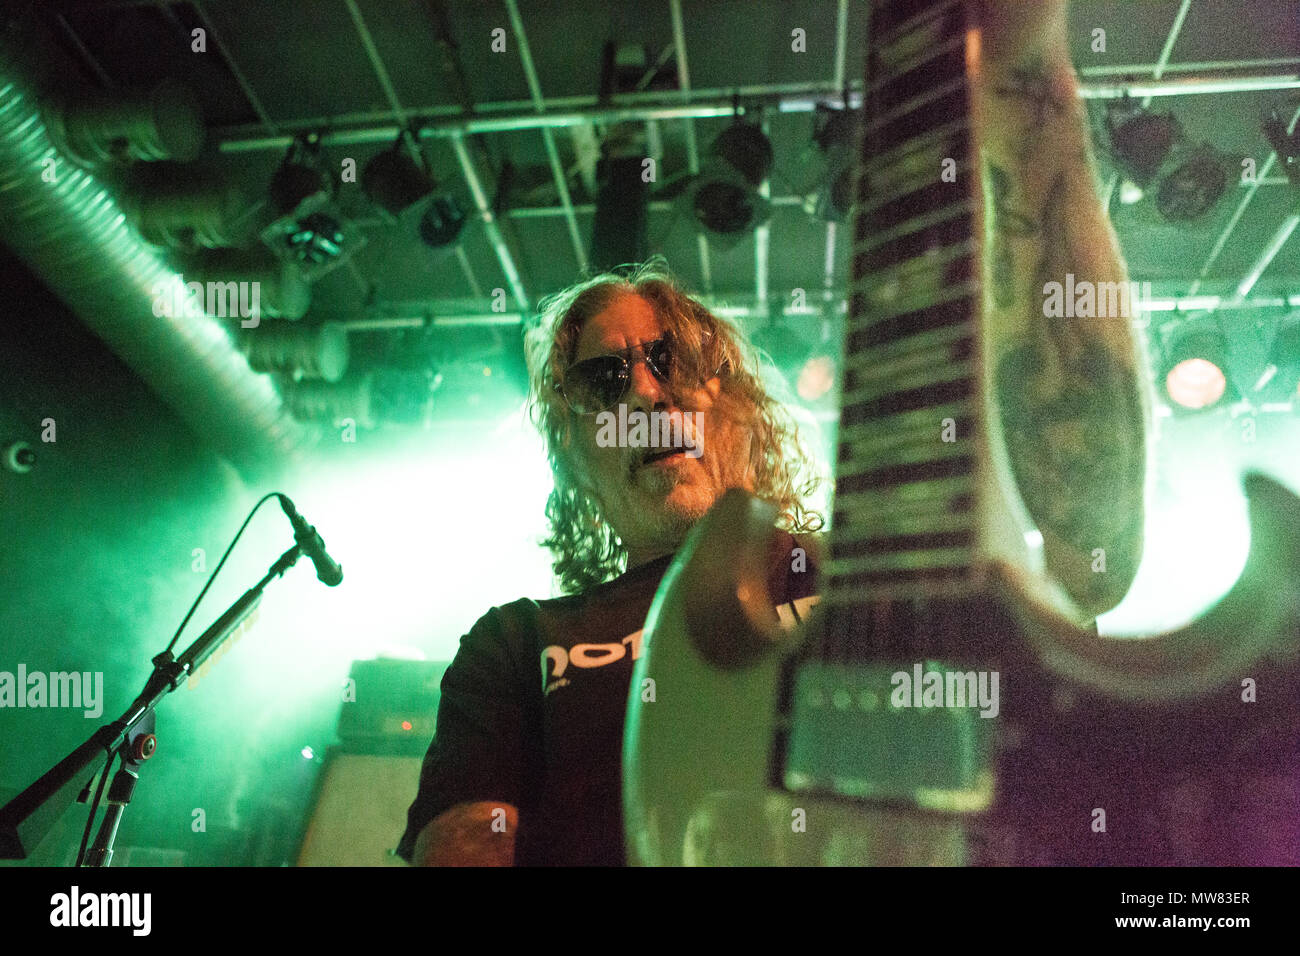 Norway, Oslo - May 23, 2018. The American stoner rock band Monster Magnet performs a live concert at Blå in Oslo. Here guitarist Phil Caivano is seen live on stage. (Photo credit: Gonzales Photo - Per-Otto Oppi). Stock Photo